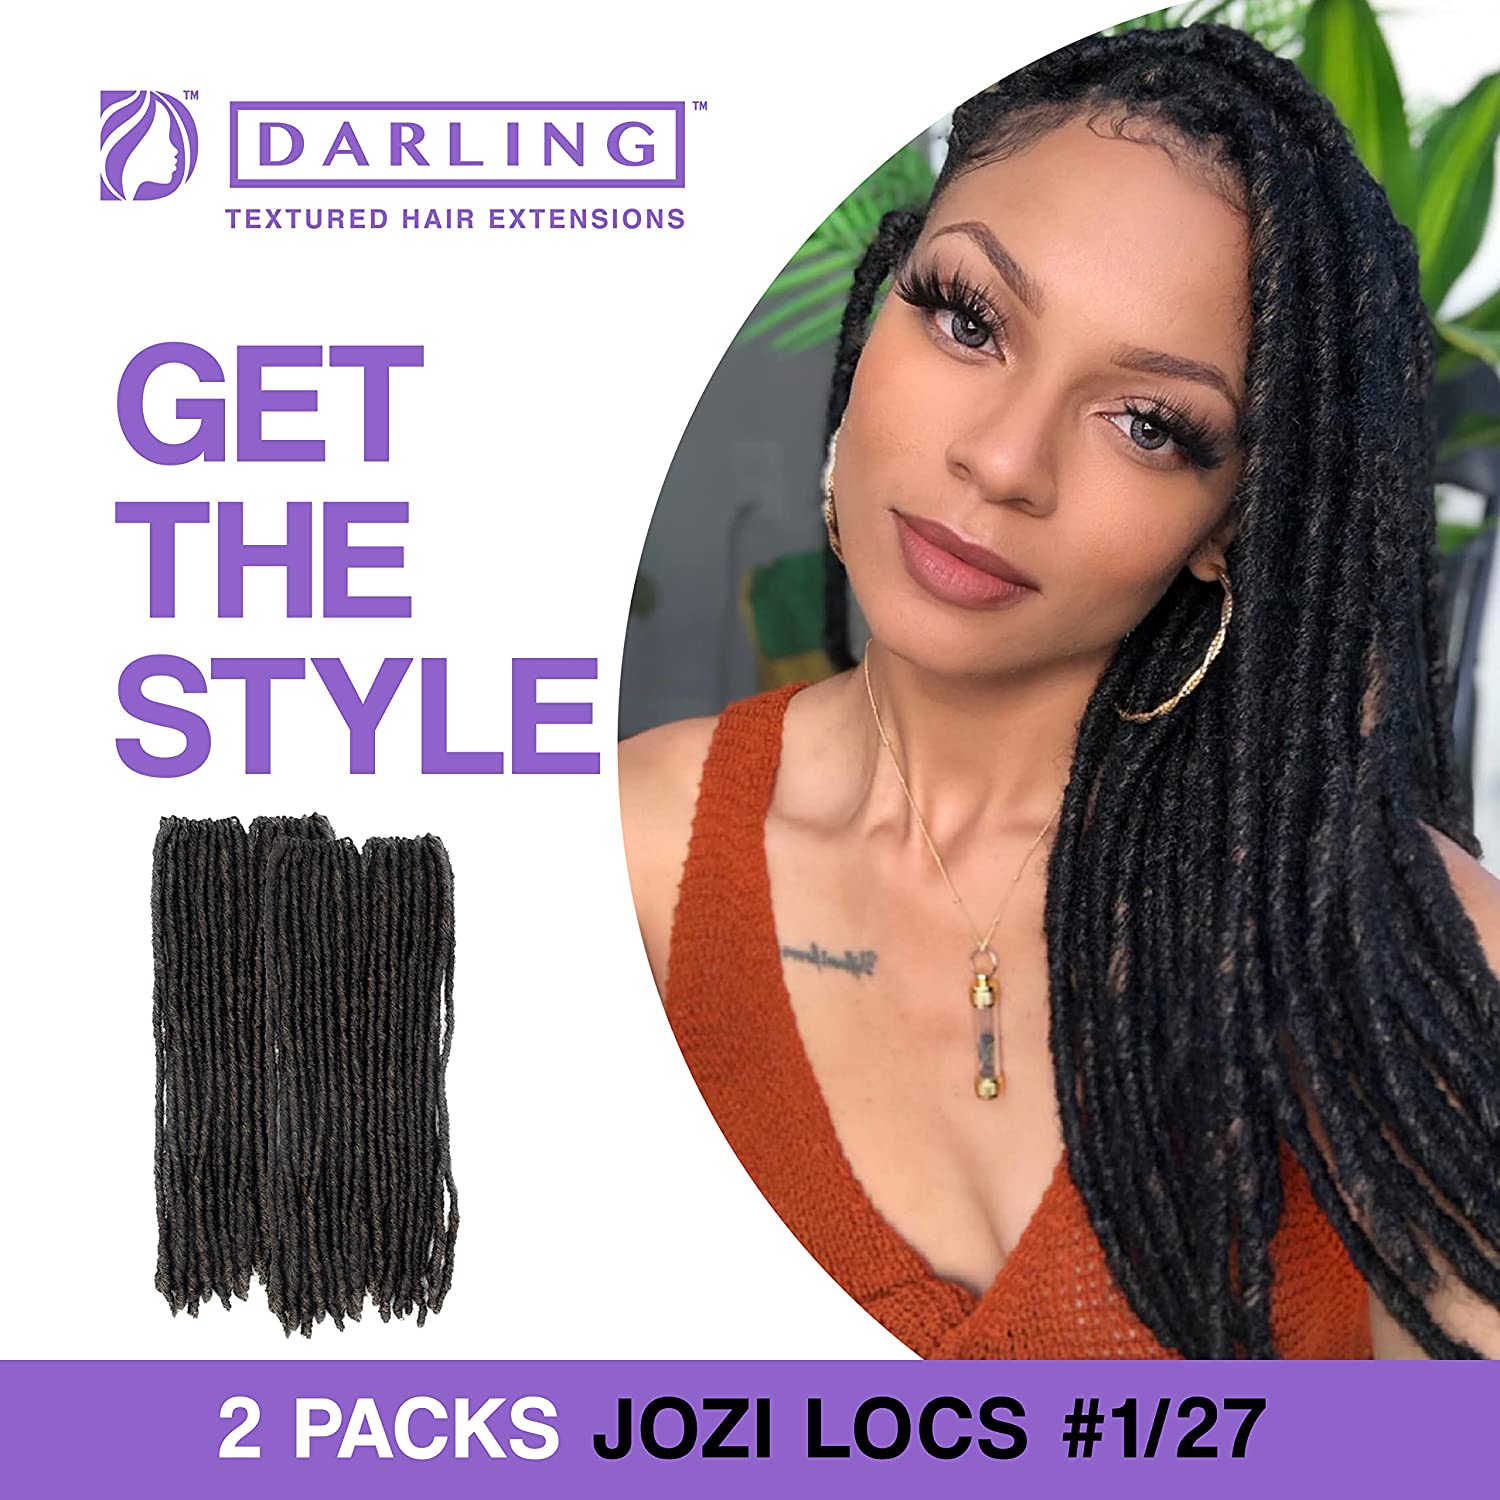 Darling Textured Hair Extensions